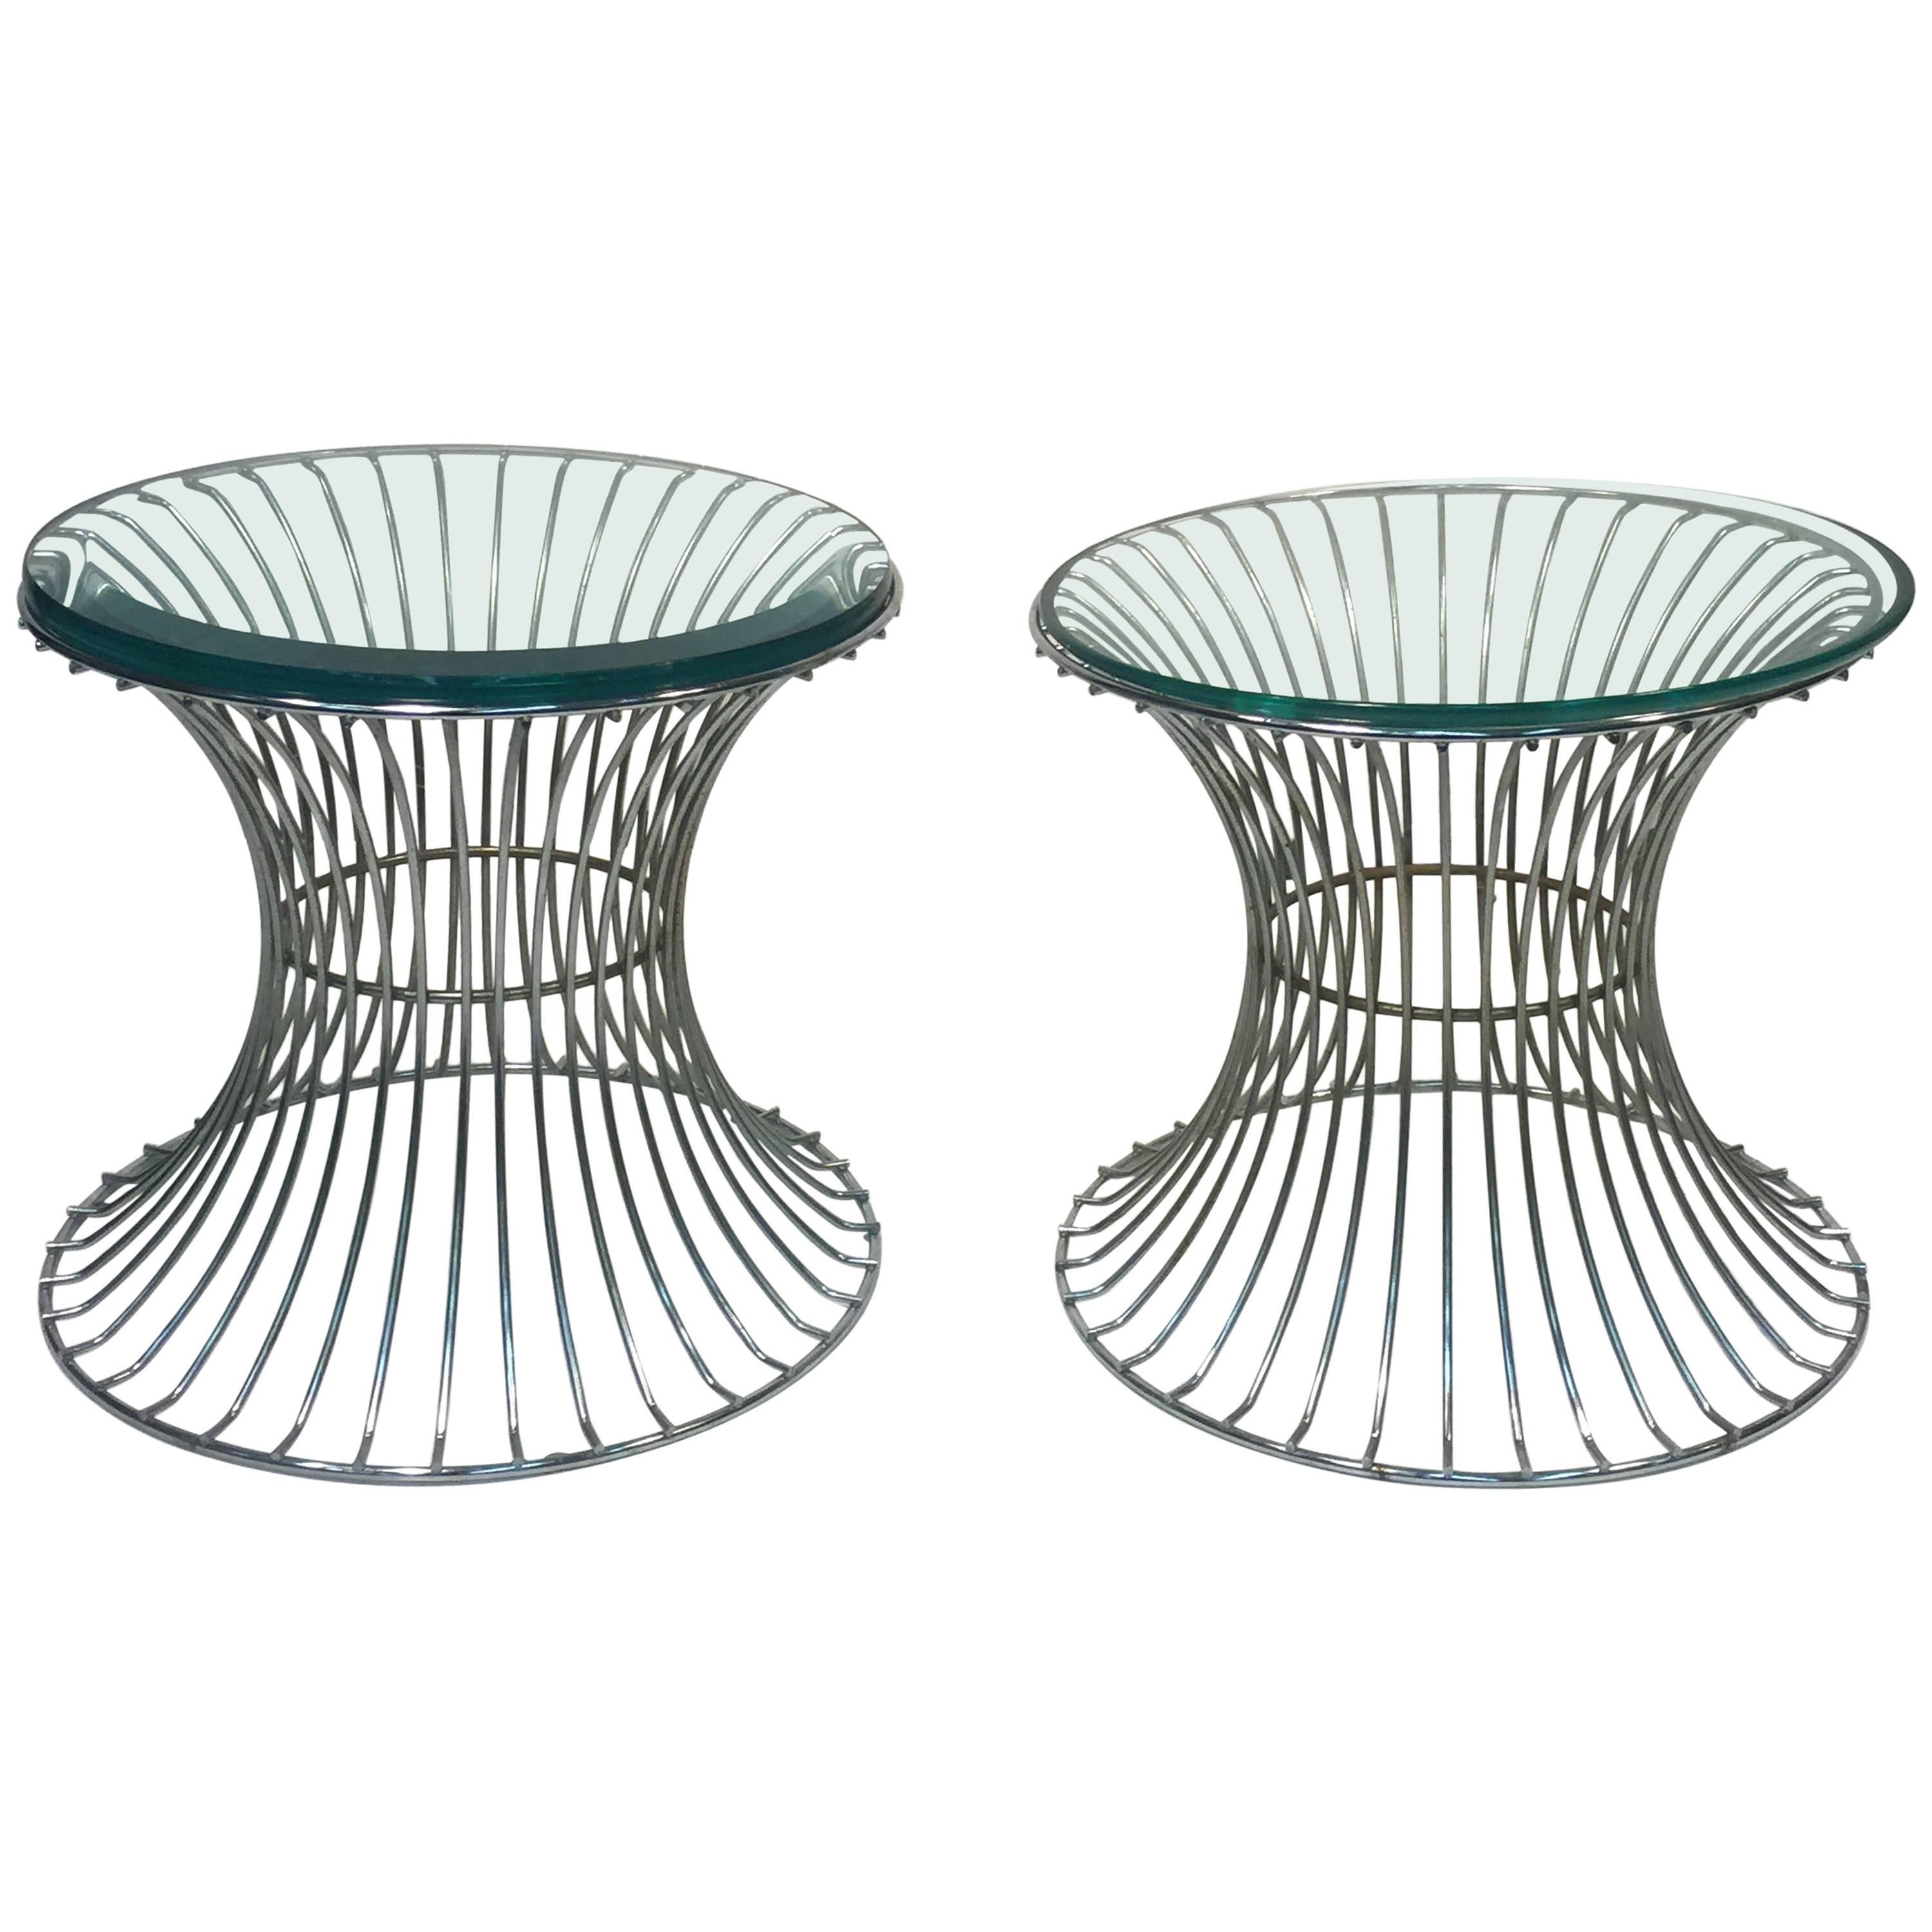 Wonderful Pair of Tables with Trumpeting Wire Bases by Warren Platner for Knoll For Sale